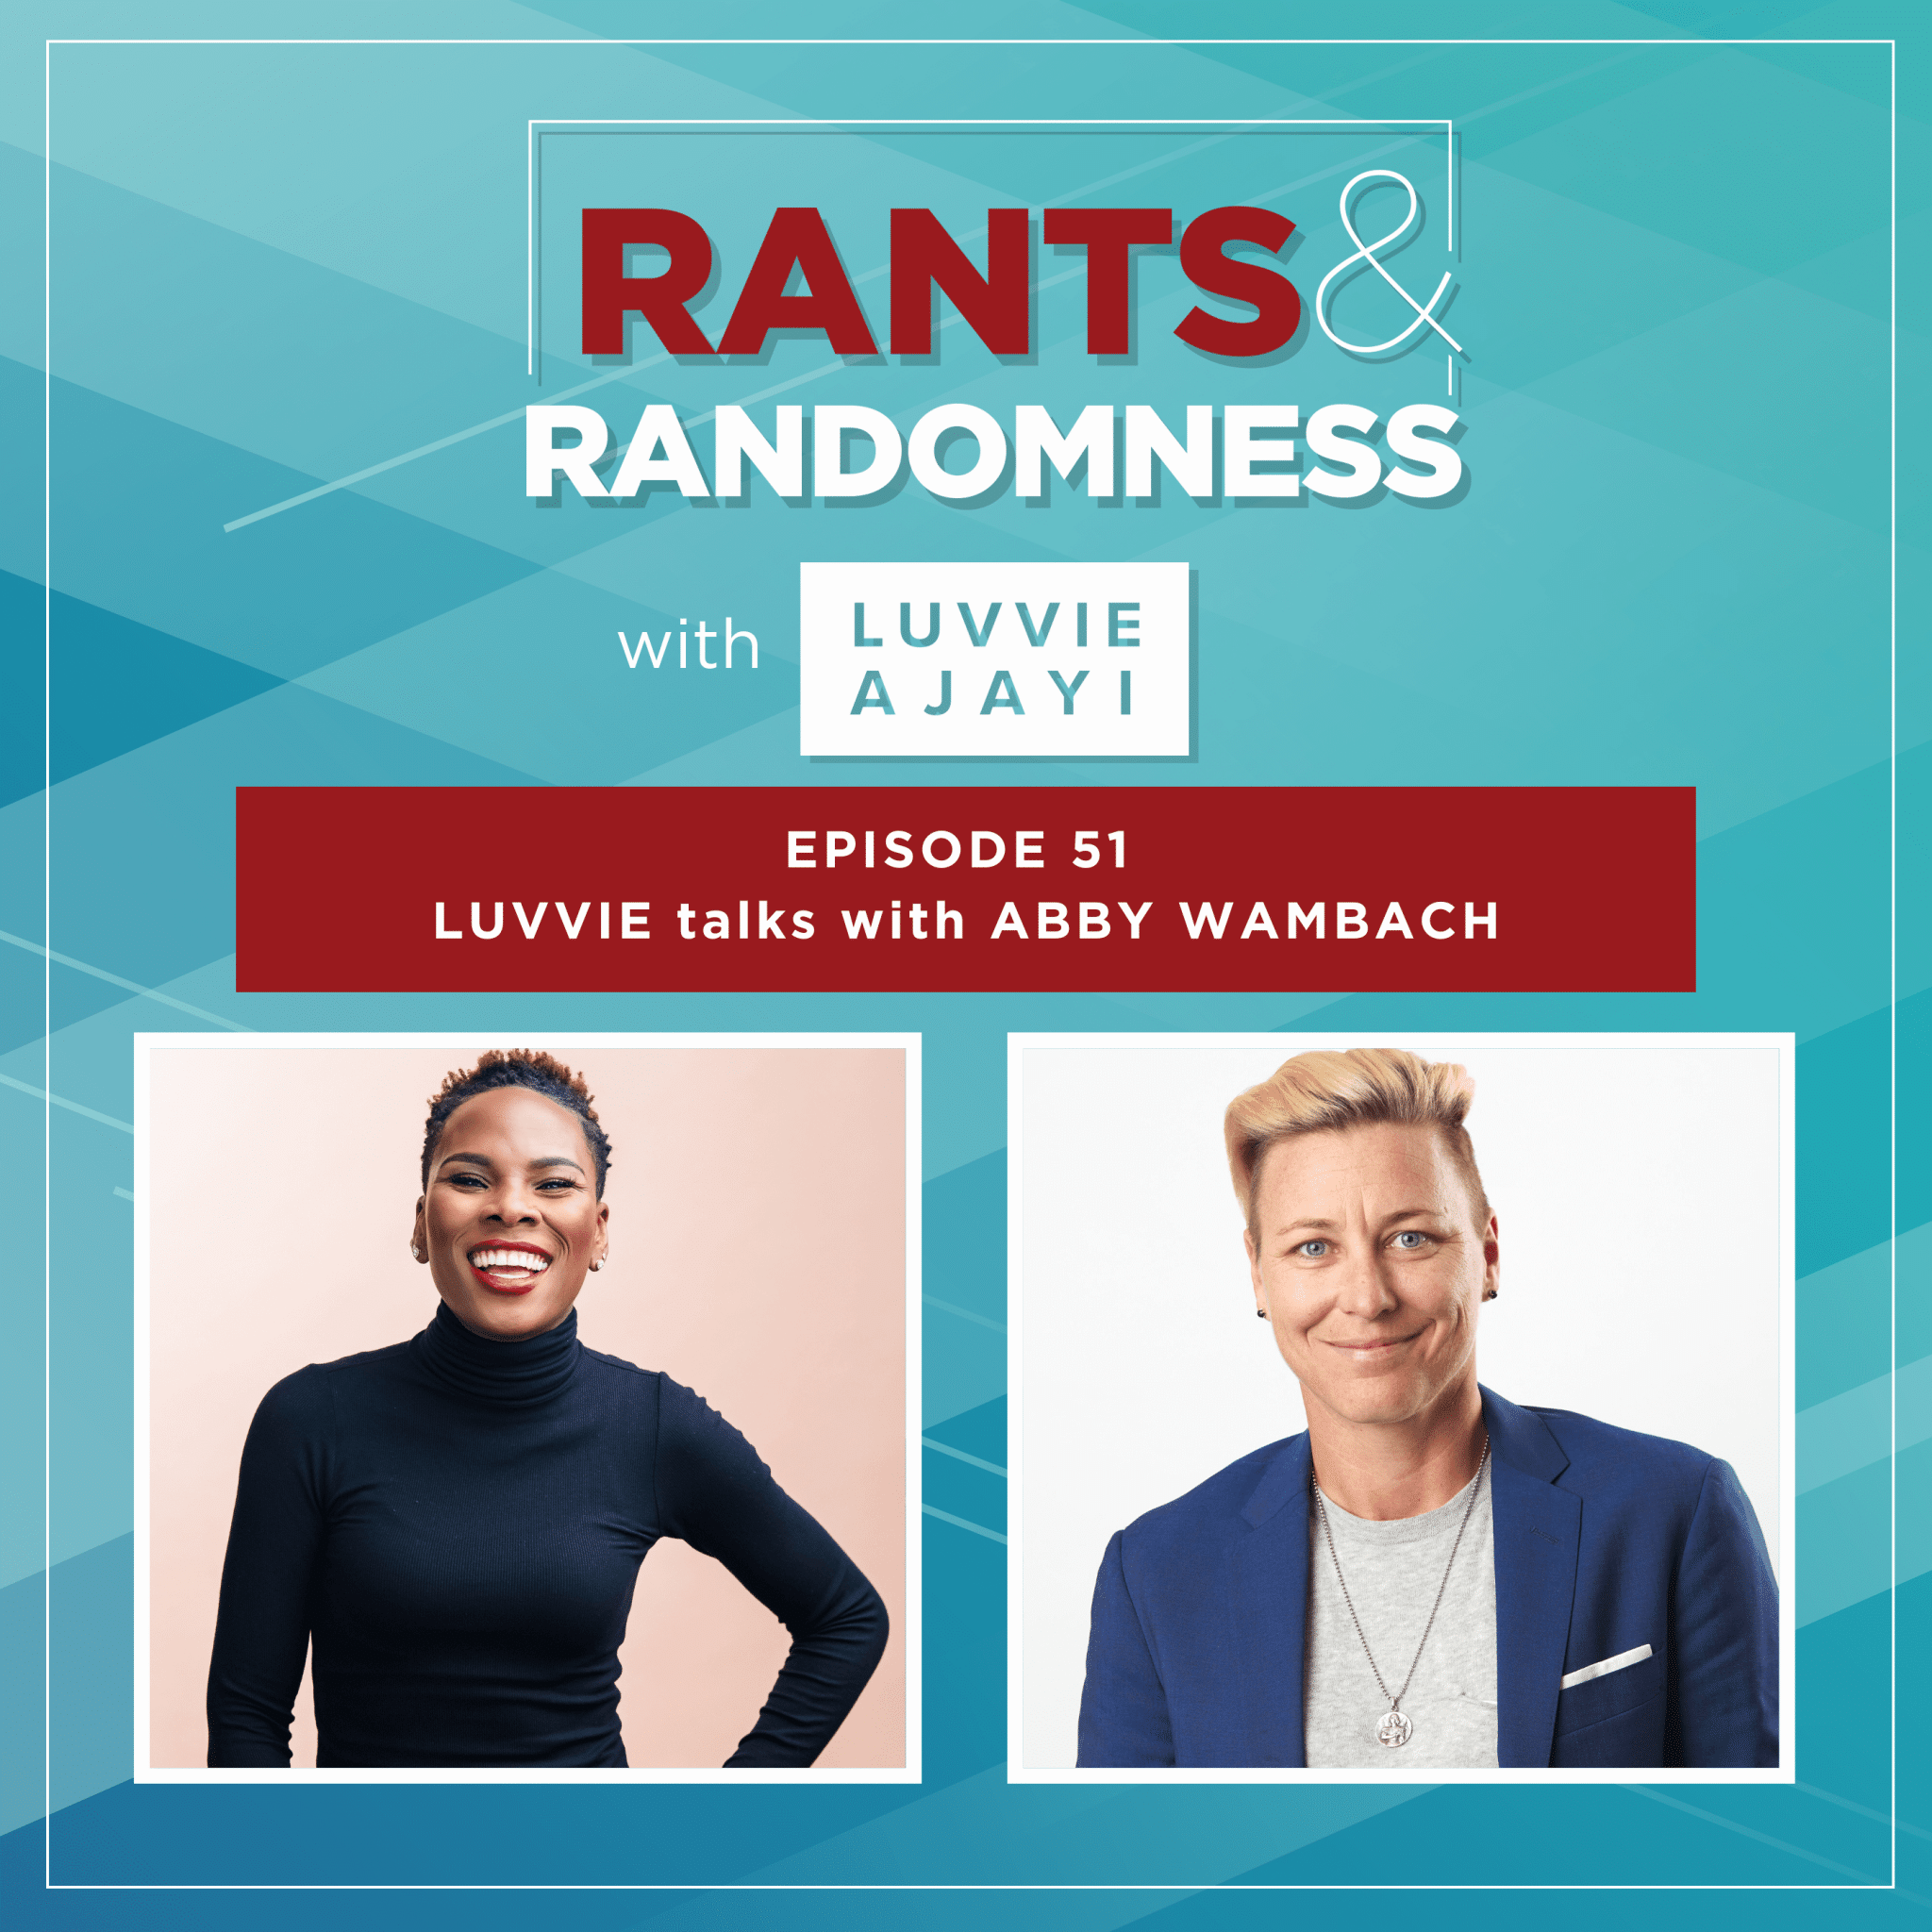 Demand More (with Abby Wambach) – Episode 51 of Rants & Randomness